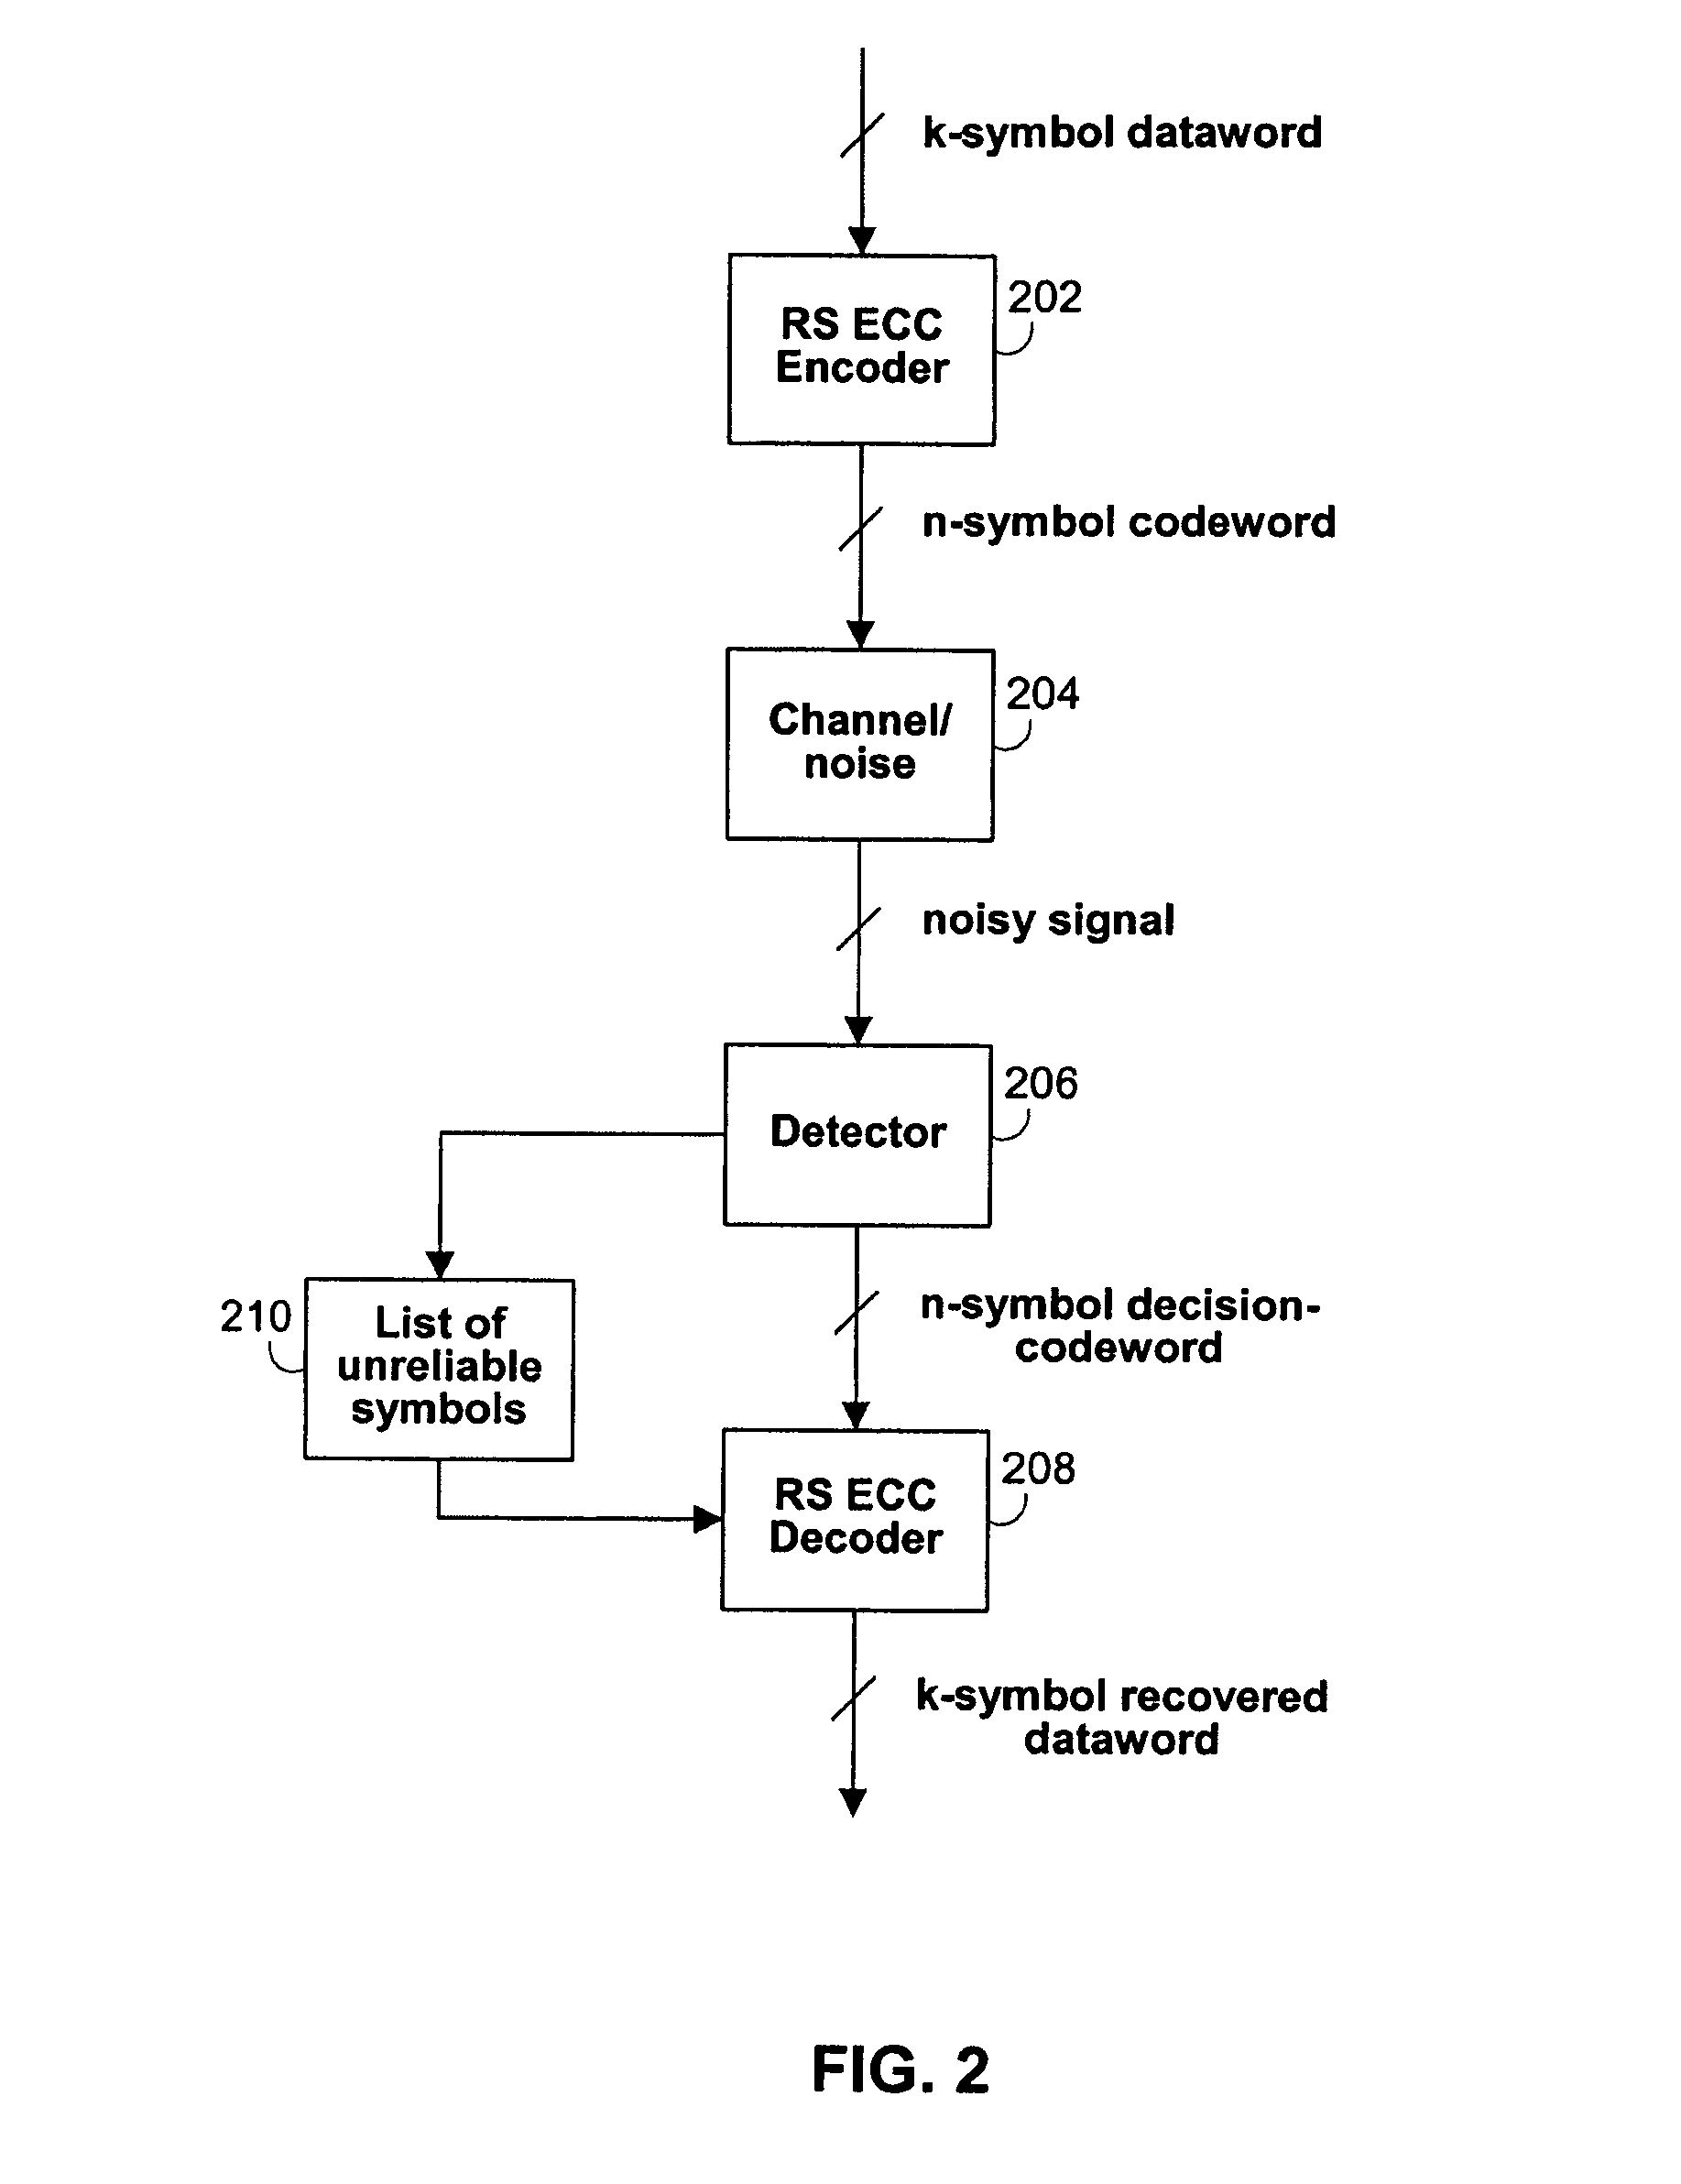 Architecture and control of reed-solomon error-correction decoding